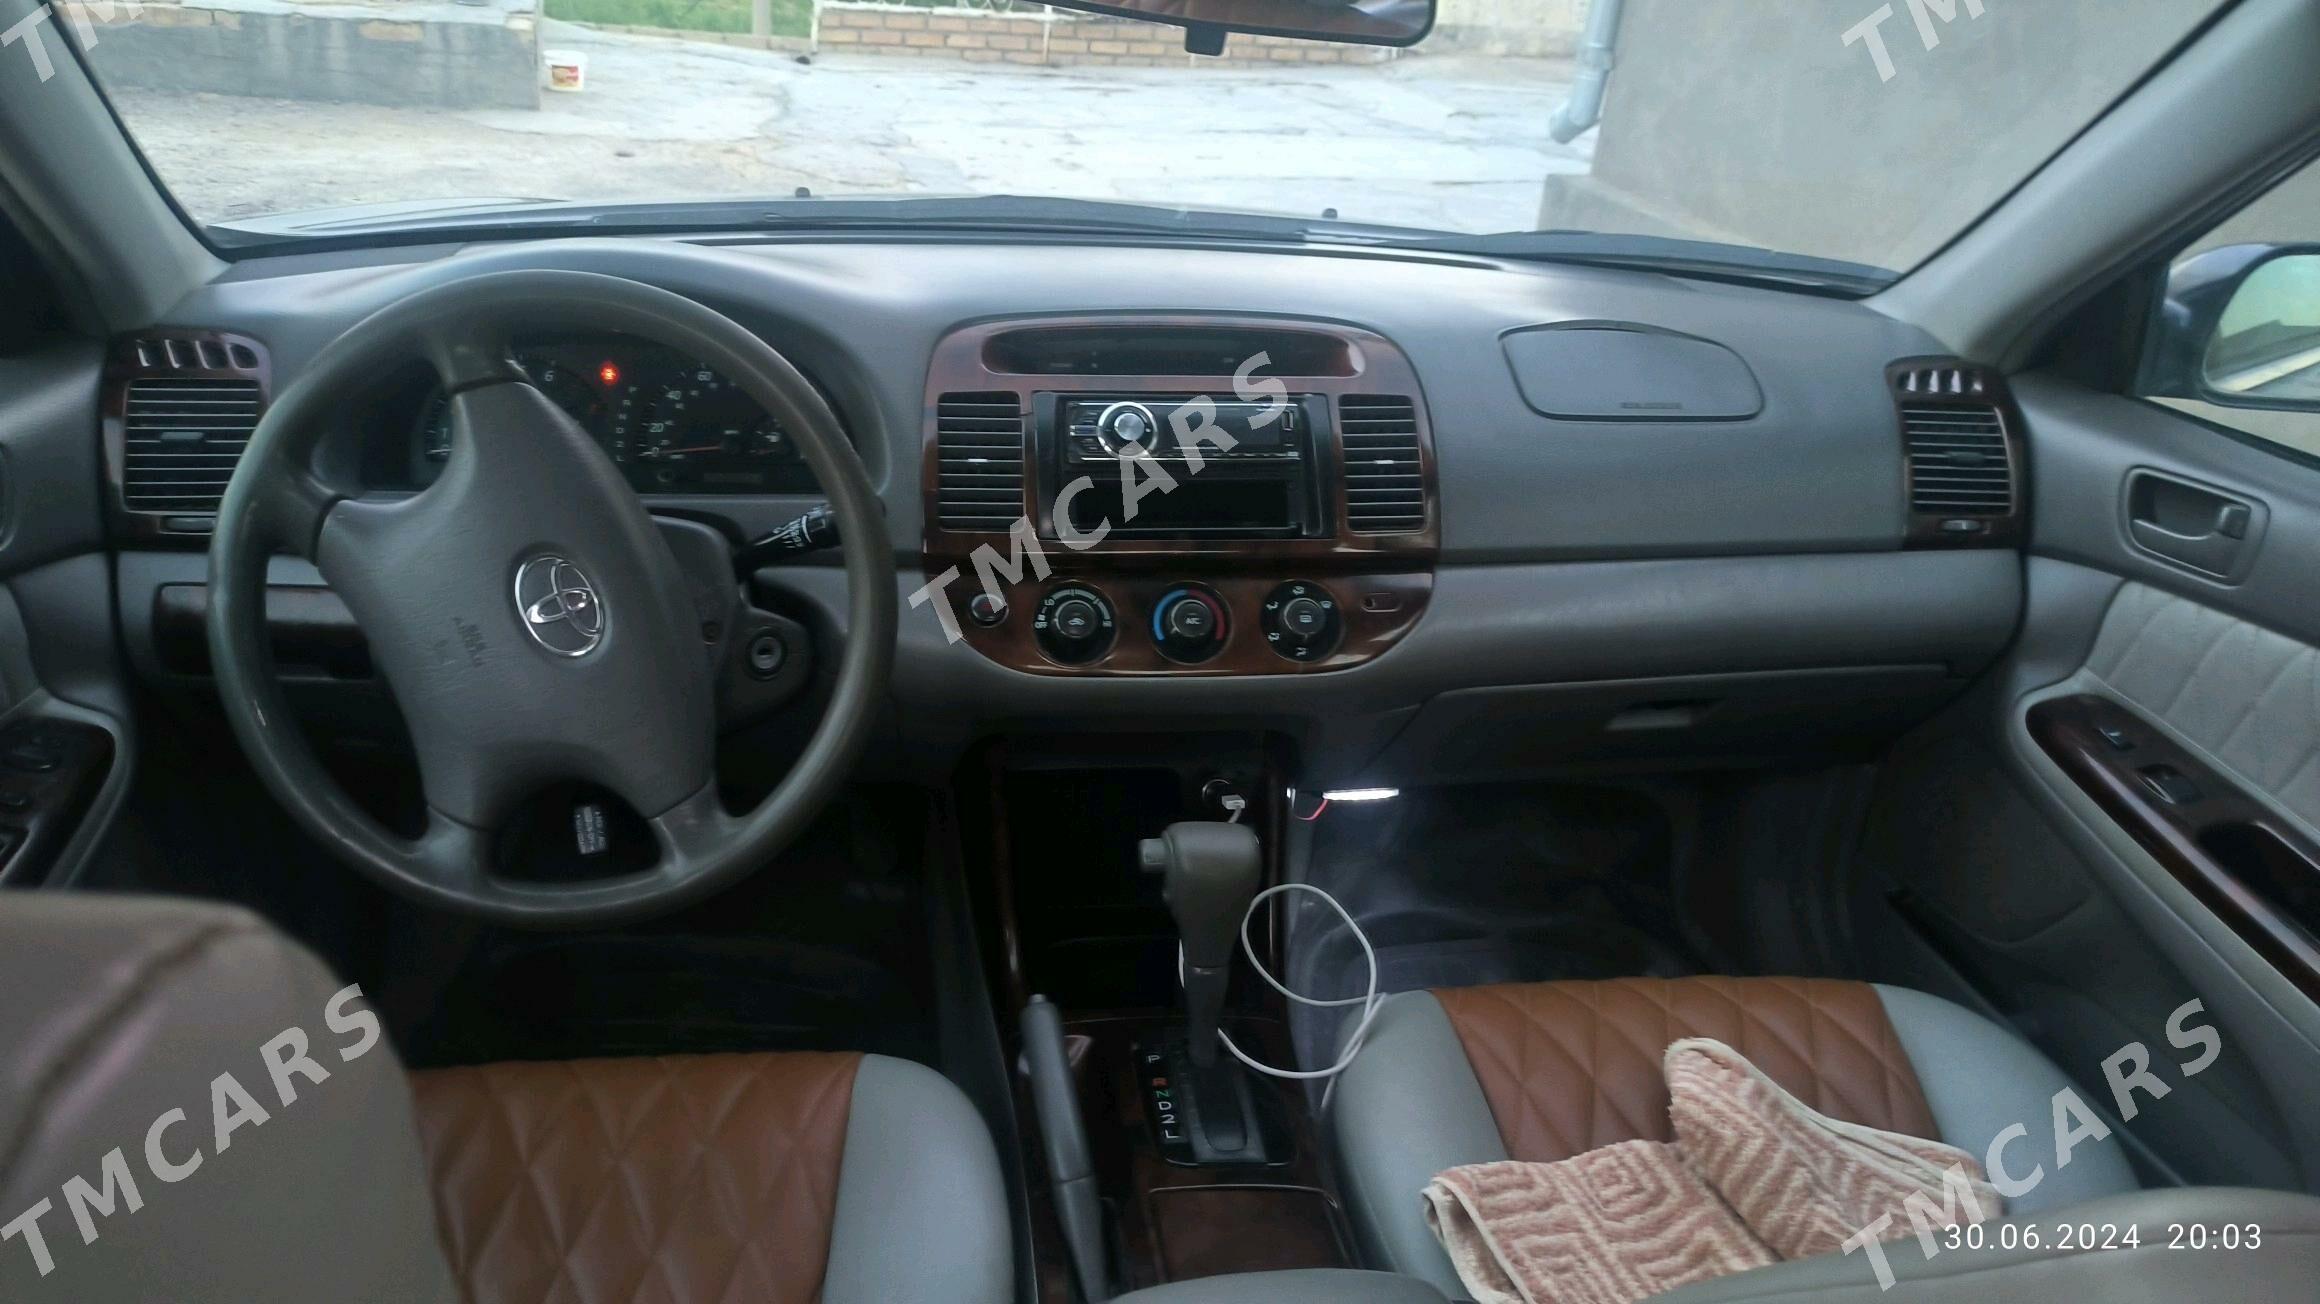 Toyota Camry 2002 - 130 000 TMT - Tagtabazar - img 6